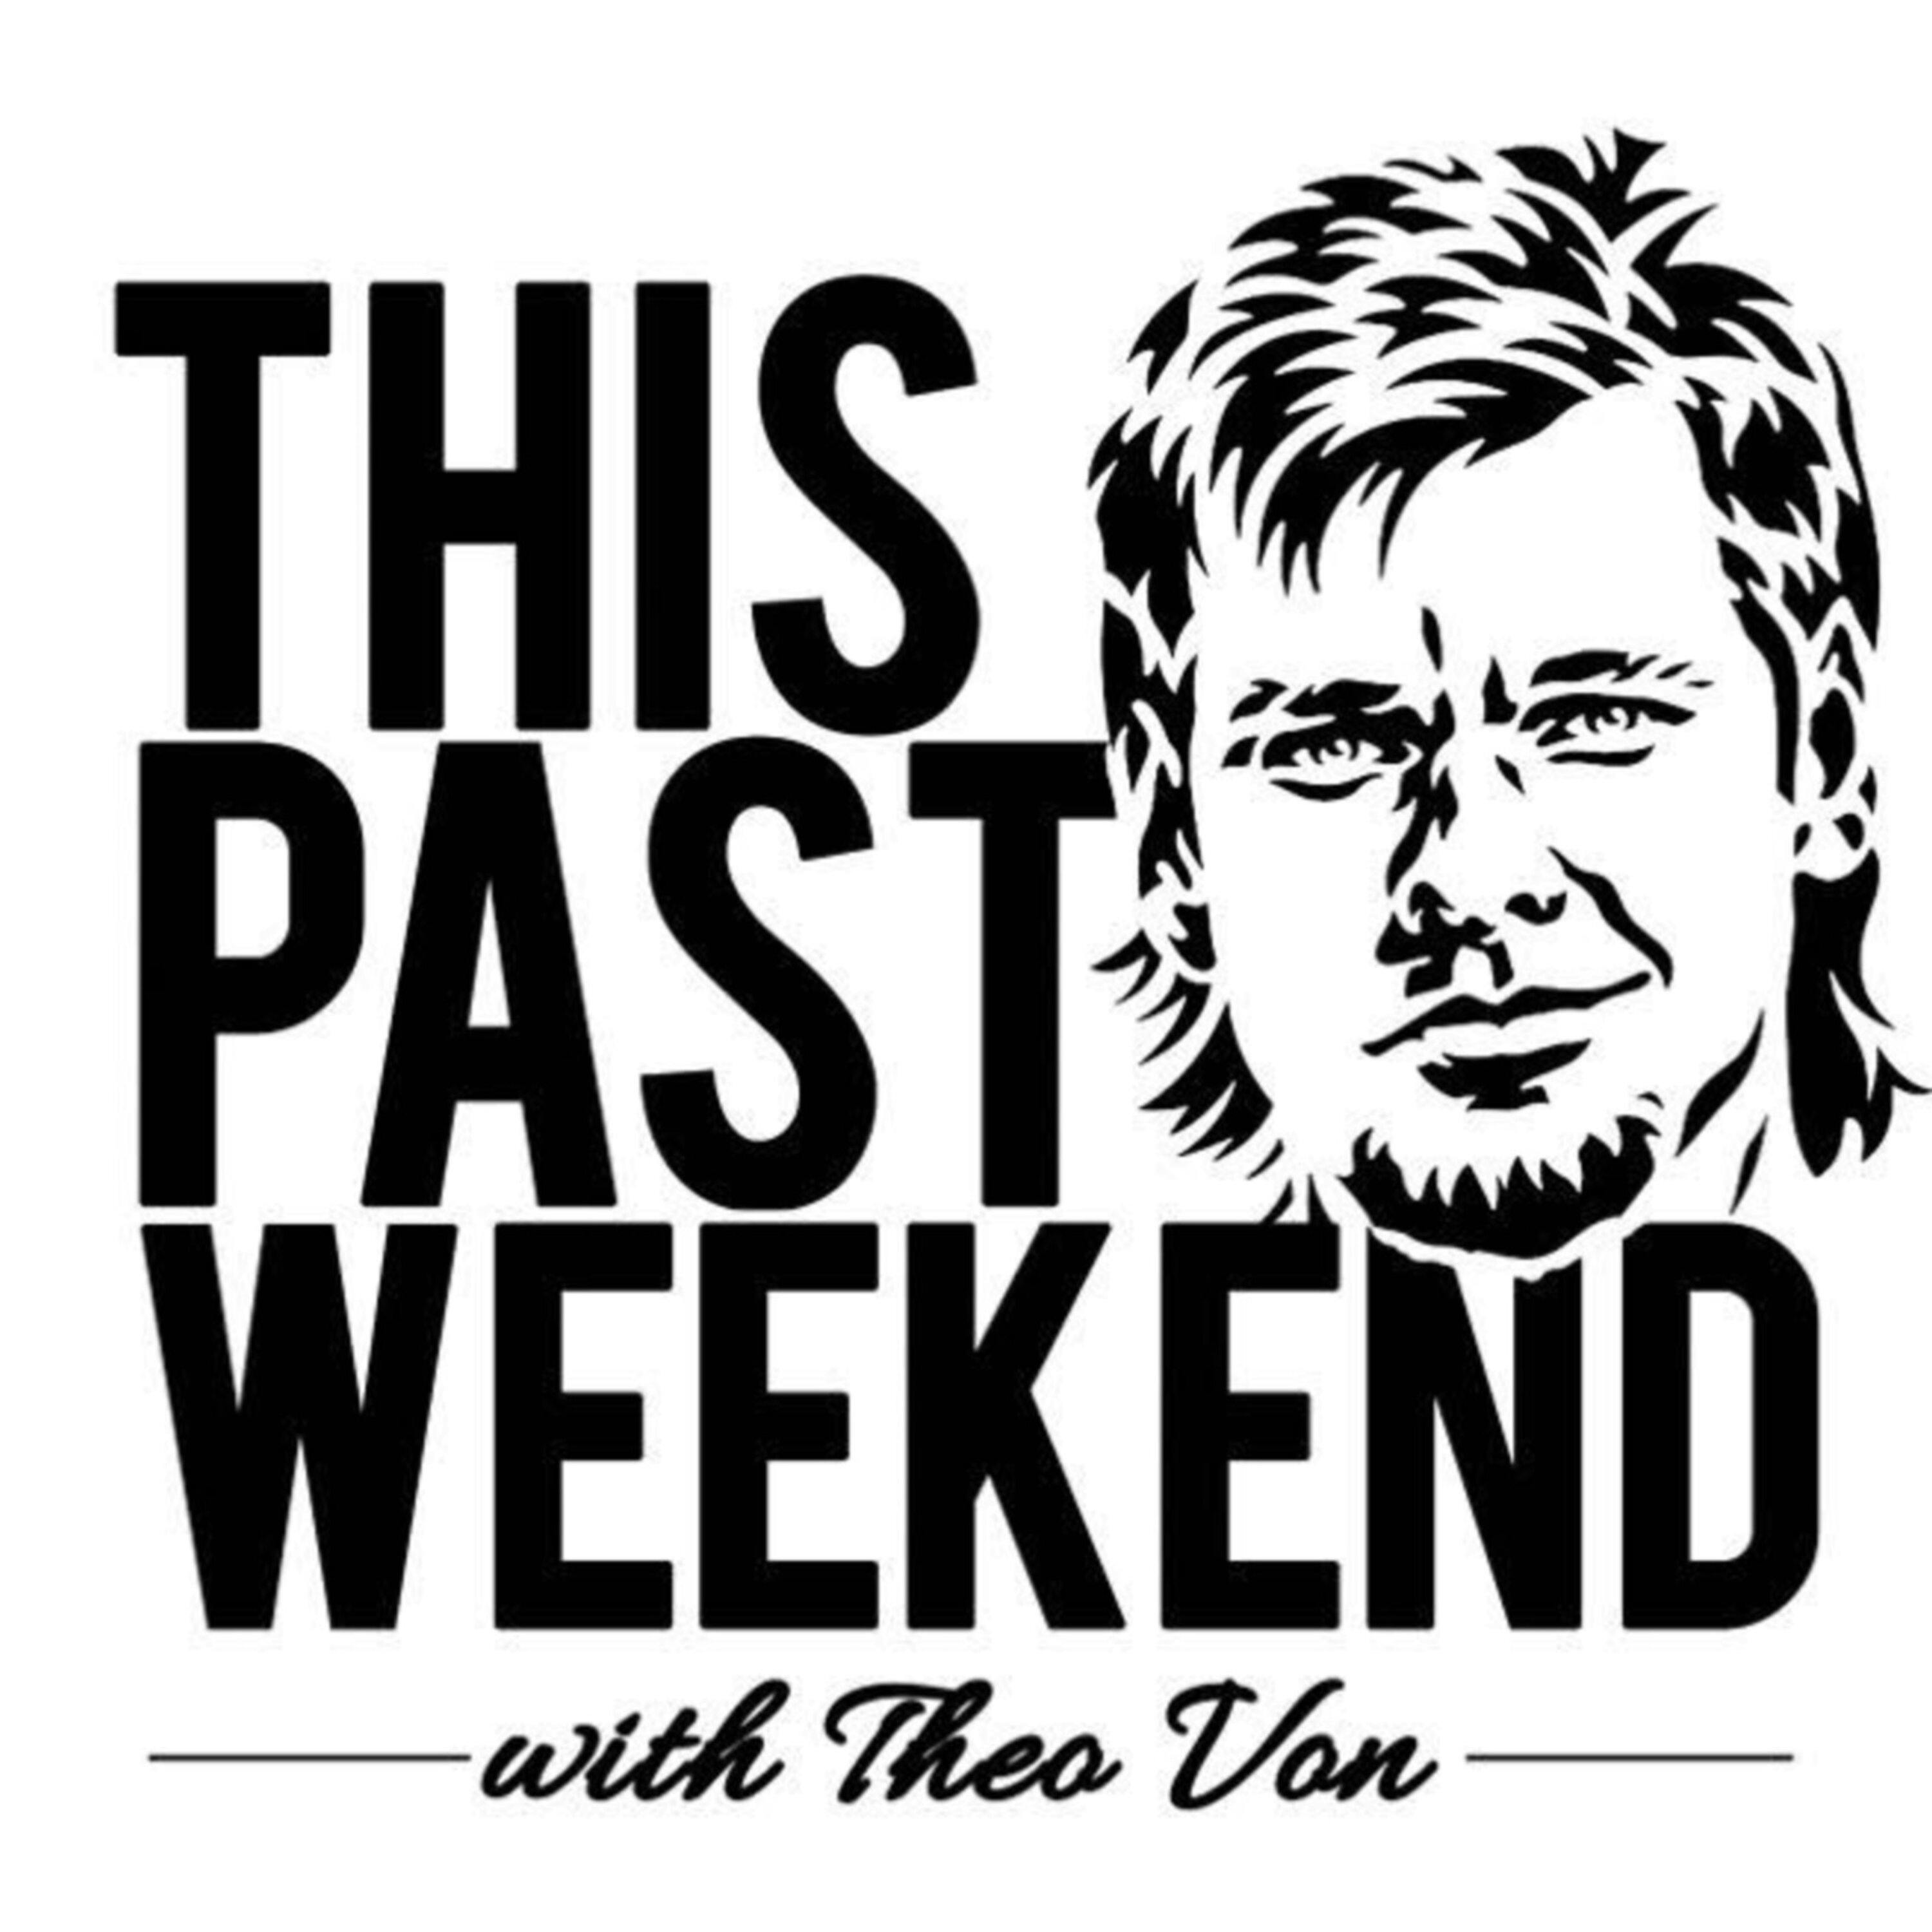 Think Differently | This Past Weekend #93 by Theo Von